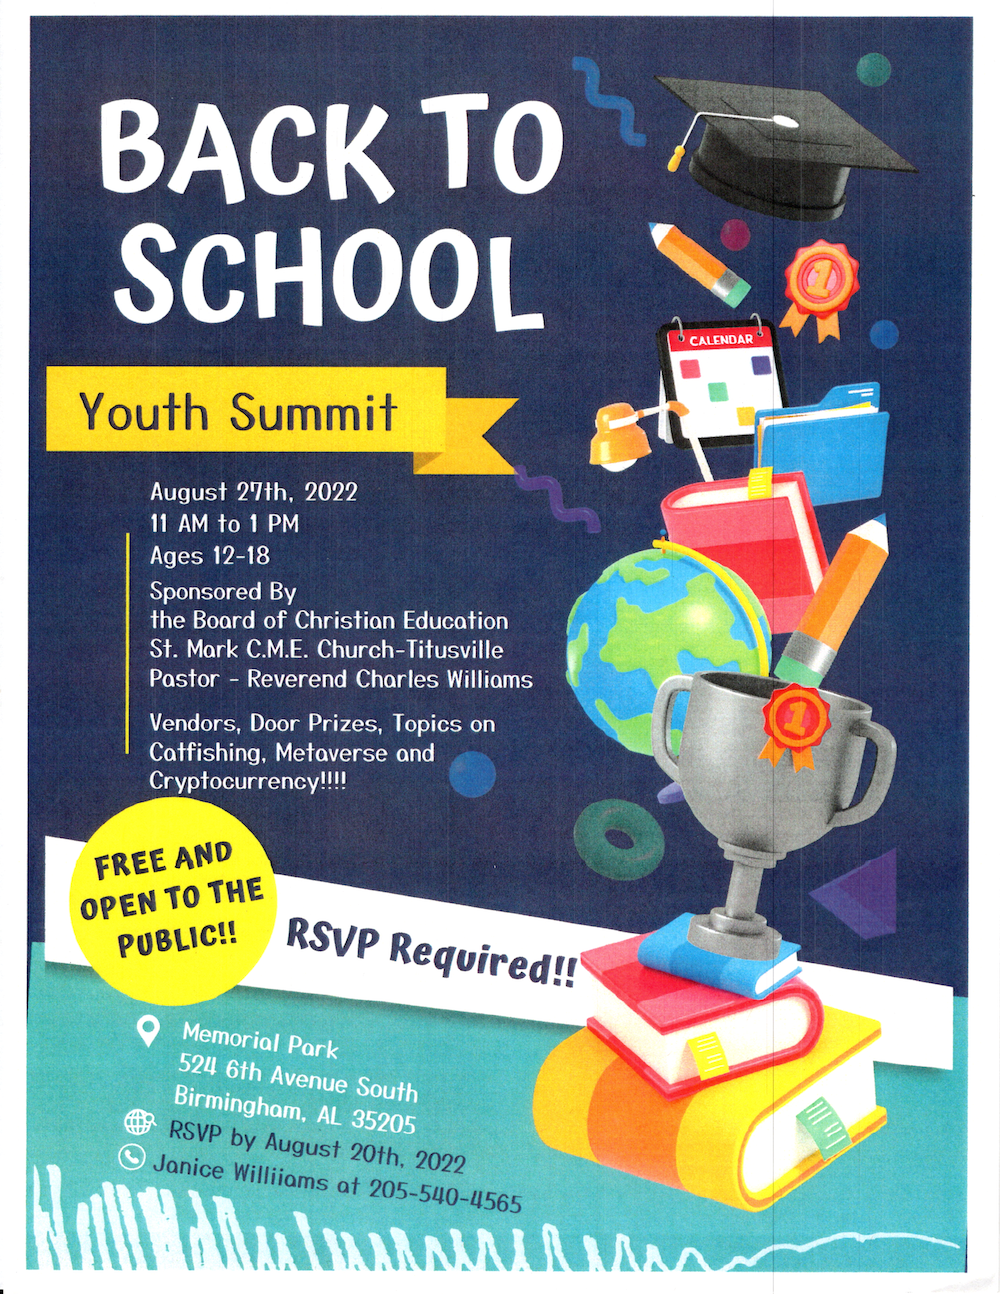 BACK TO SCHOOL Youth Summit